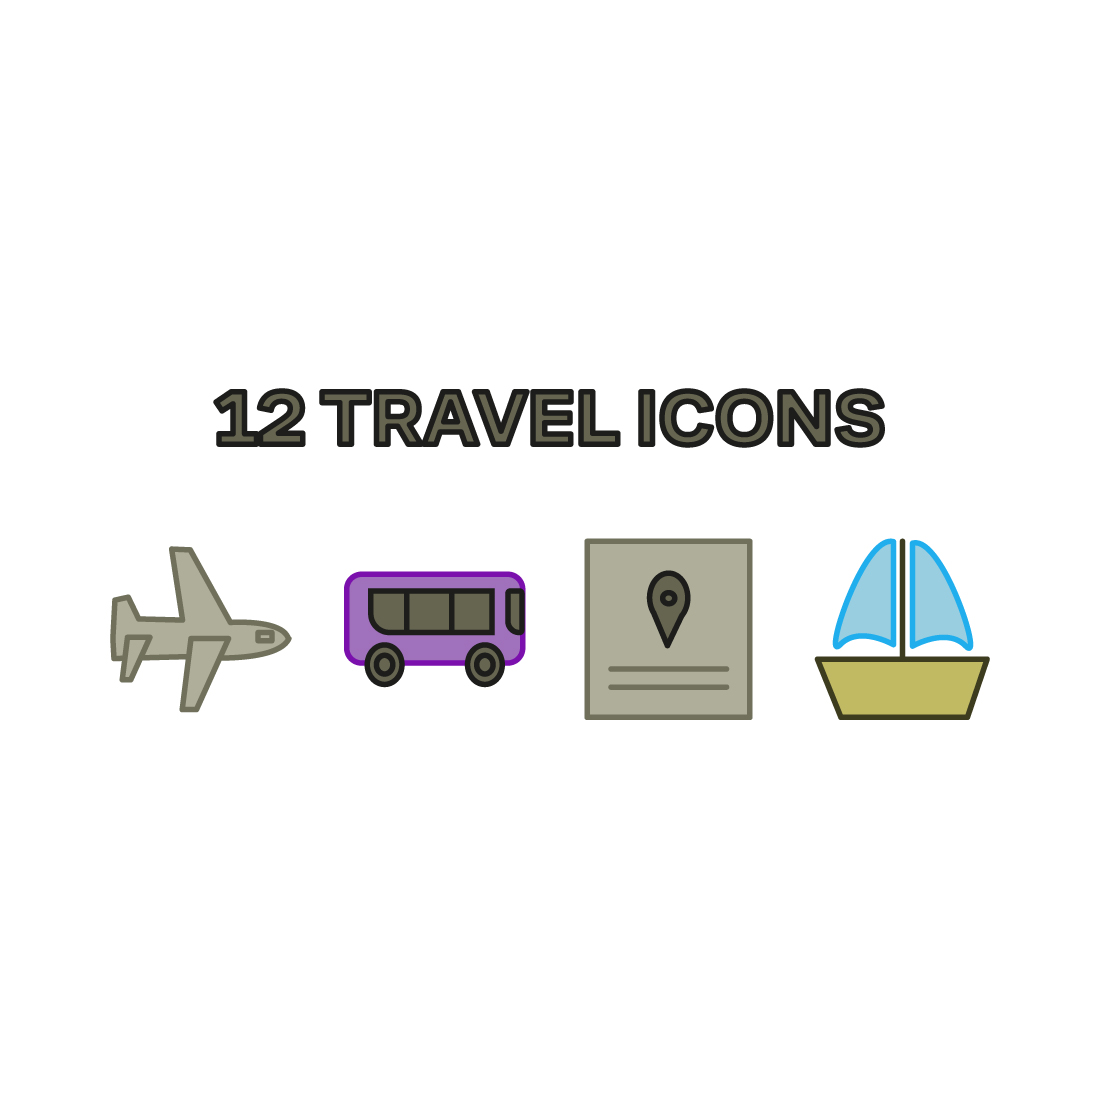 Free travel icons main cover.